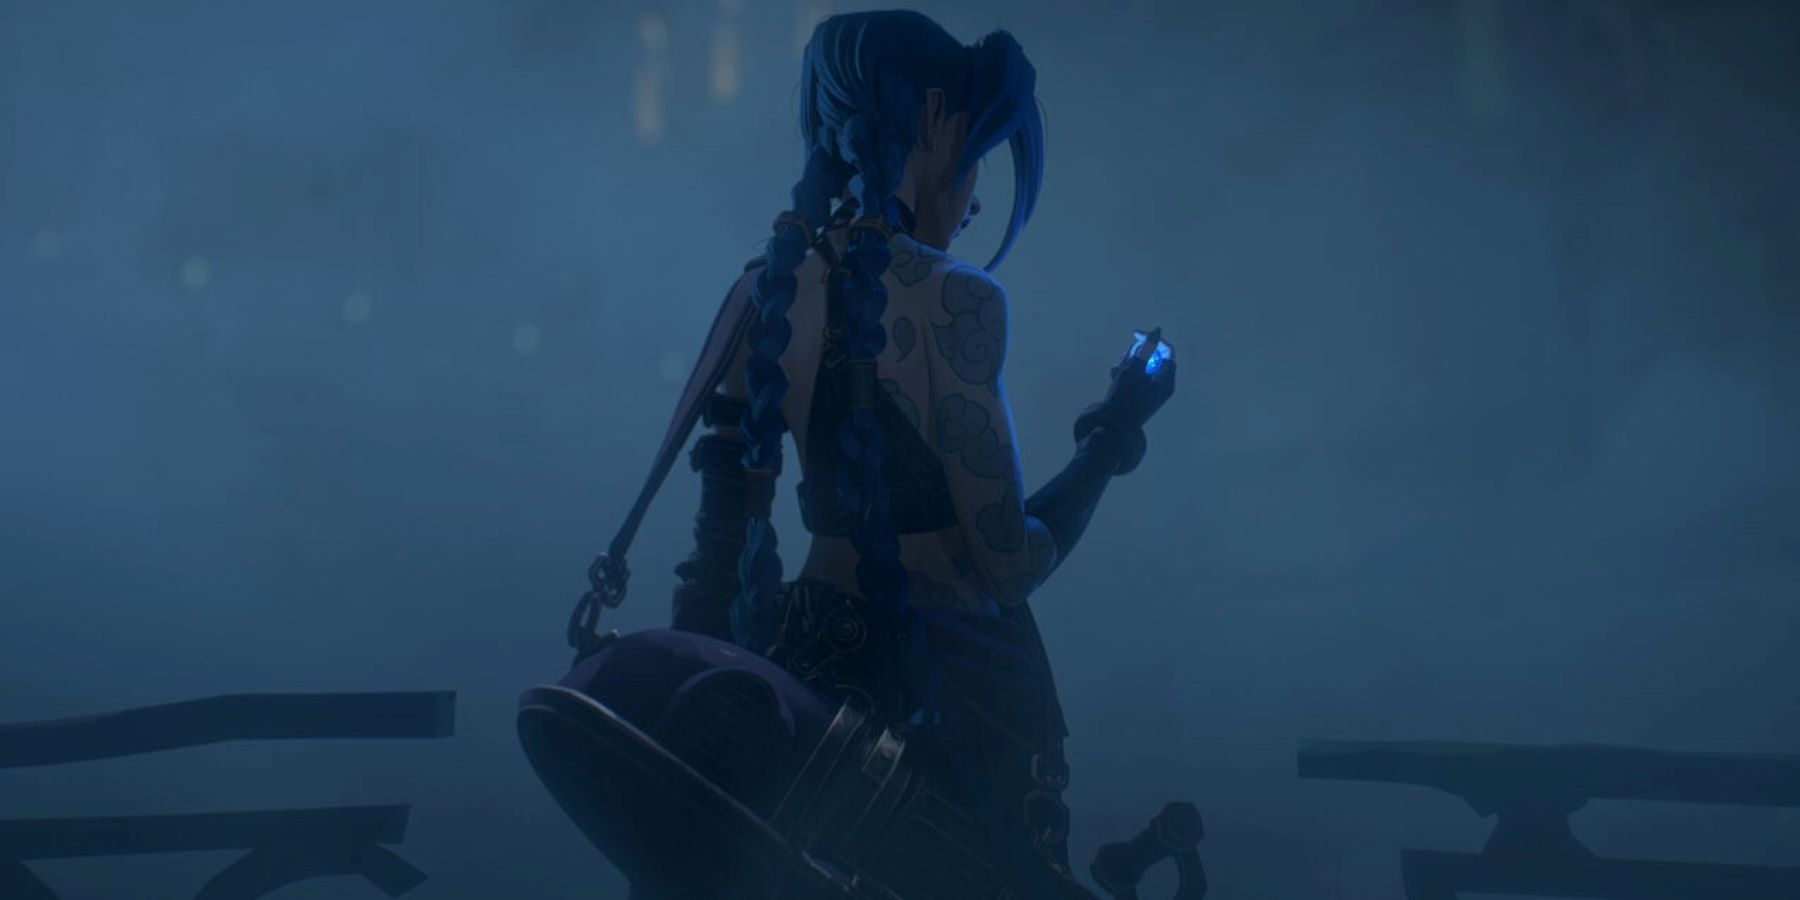 League of Legends champion Jinx pictured from behind, standing on a bridge in fog and looking at a hextech crystal